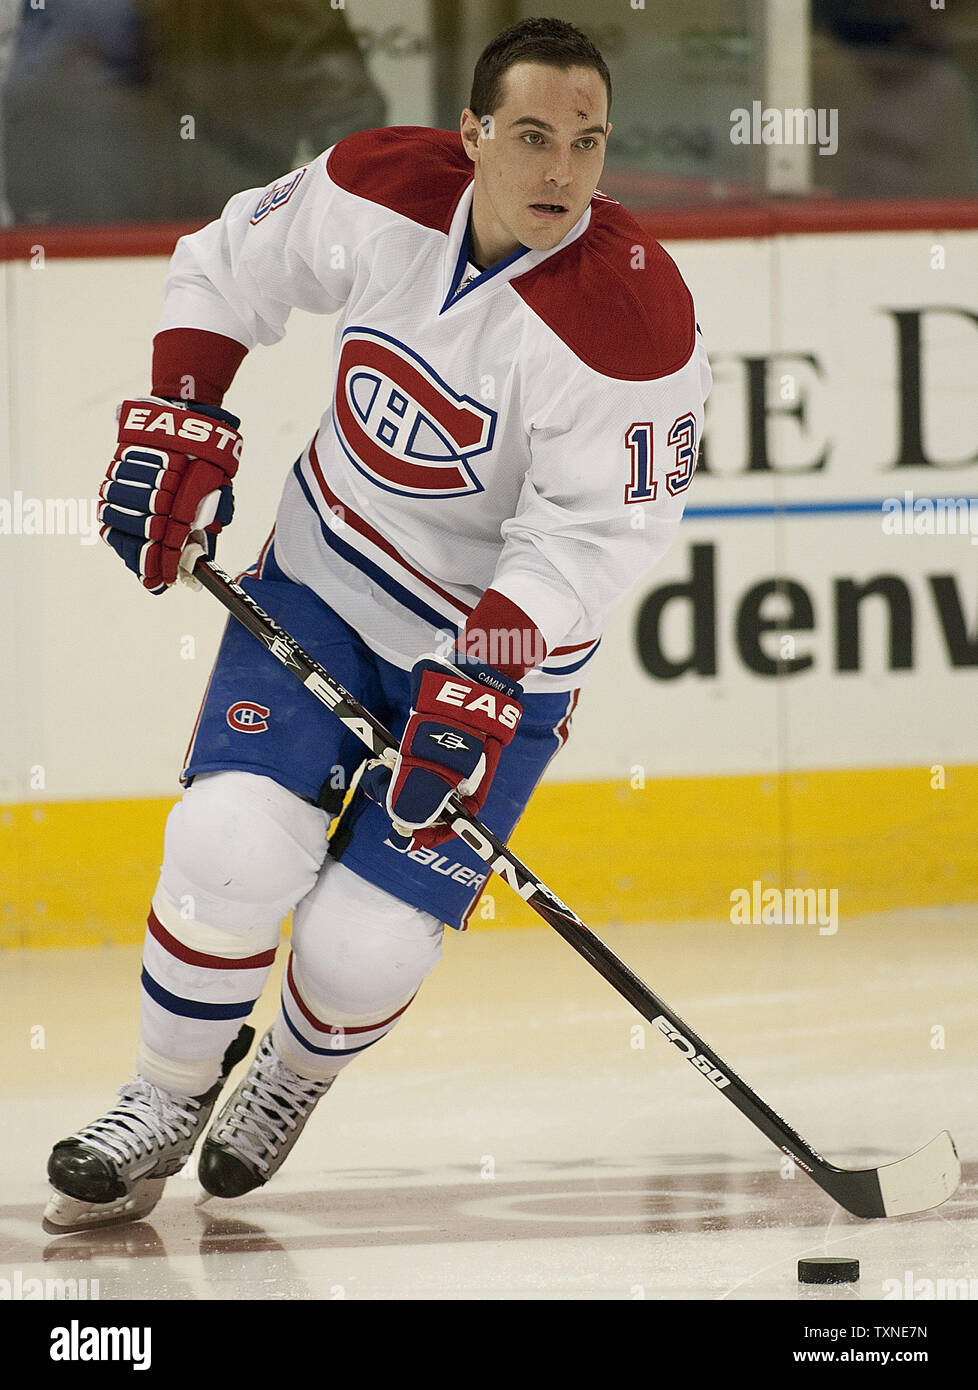 Montreal Canadiens left wing Michael Cammalleri skates during warm ups at the Pepsi Center in Denver on December 19, 2010.  The Canadiens lead the Northeast division with the Avalanche percentage points behind the Northwest division lead.        UPI/Gary C. Caskey Stock Photo